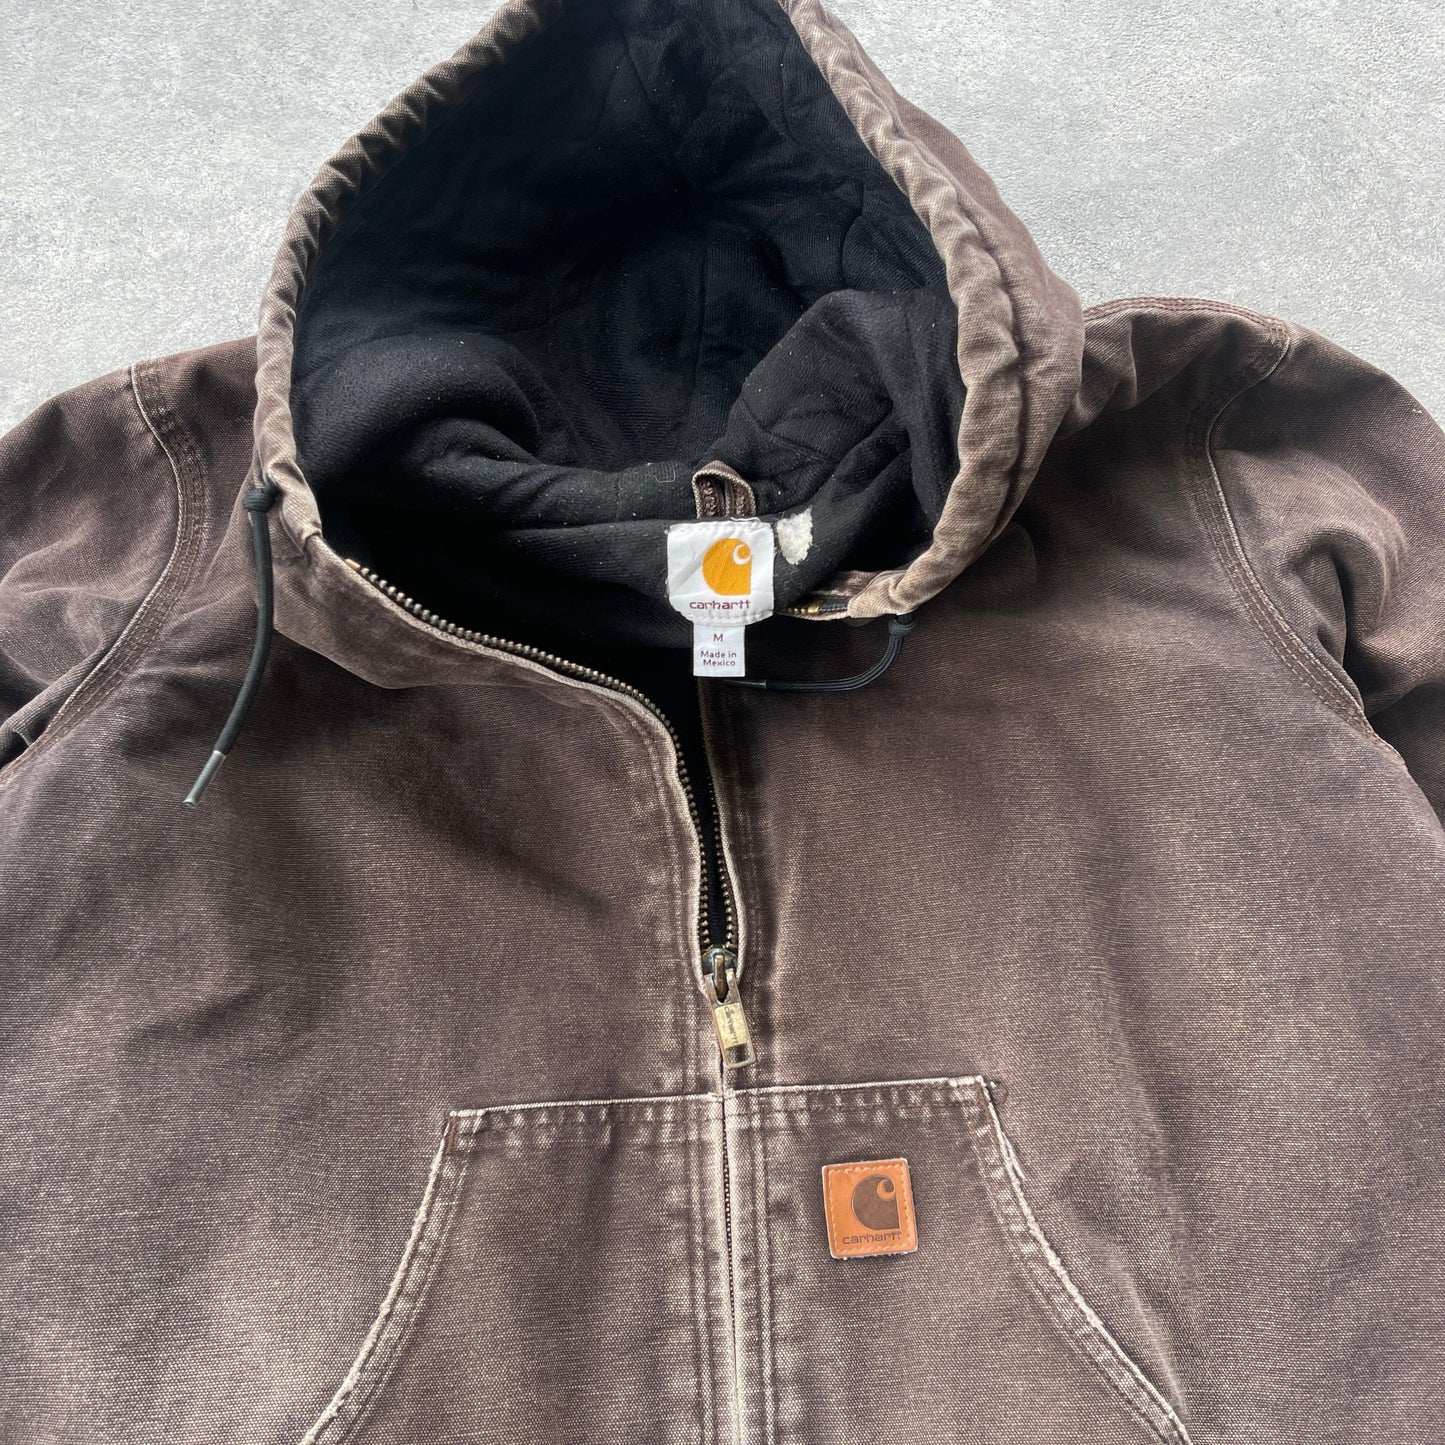 Carhartt 2011 heavyweight hooded active jacket (M) - Known Source